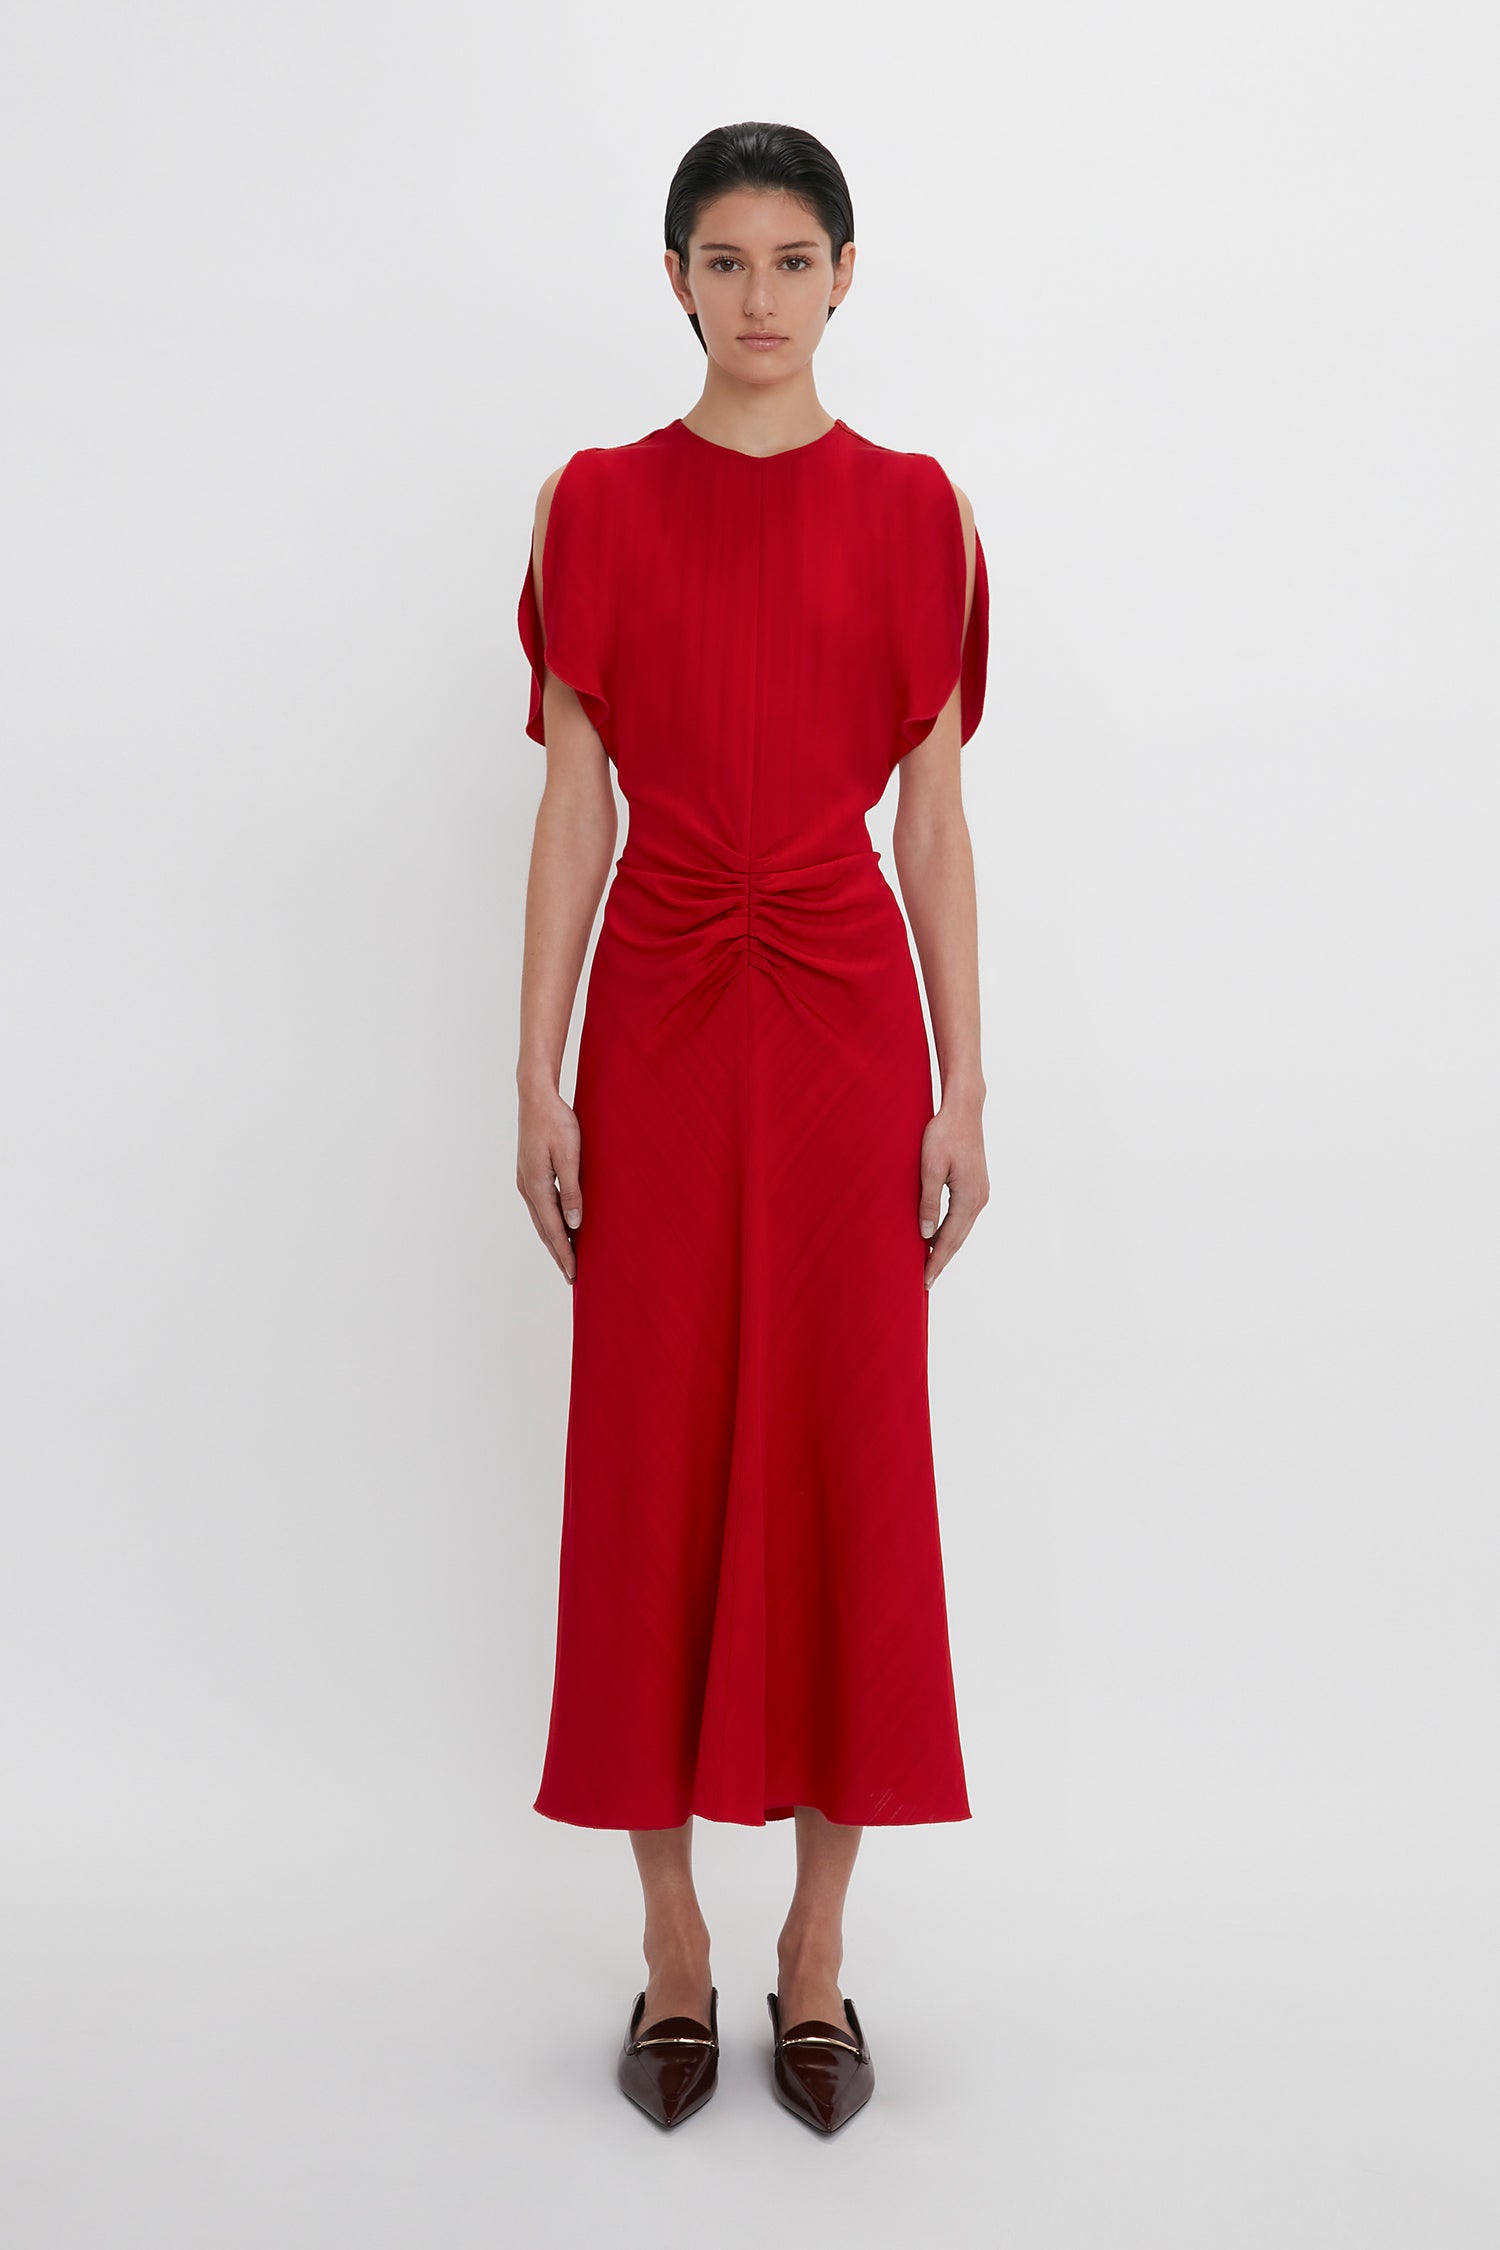 Woman in a red Victoria Beckham Exclusive Gathered V-Neck Midi Dress In Carmine with a twisted front detail, standing against a white background.